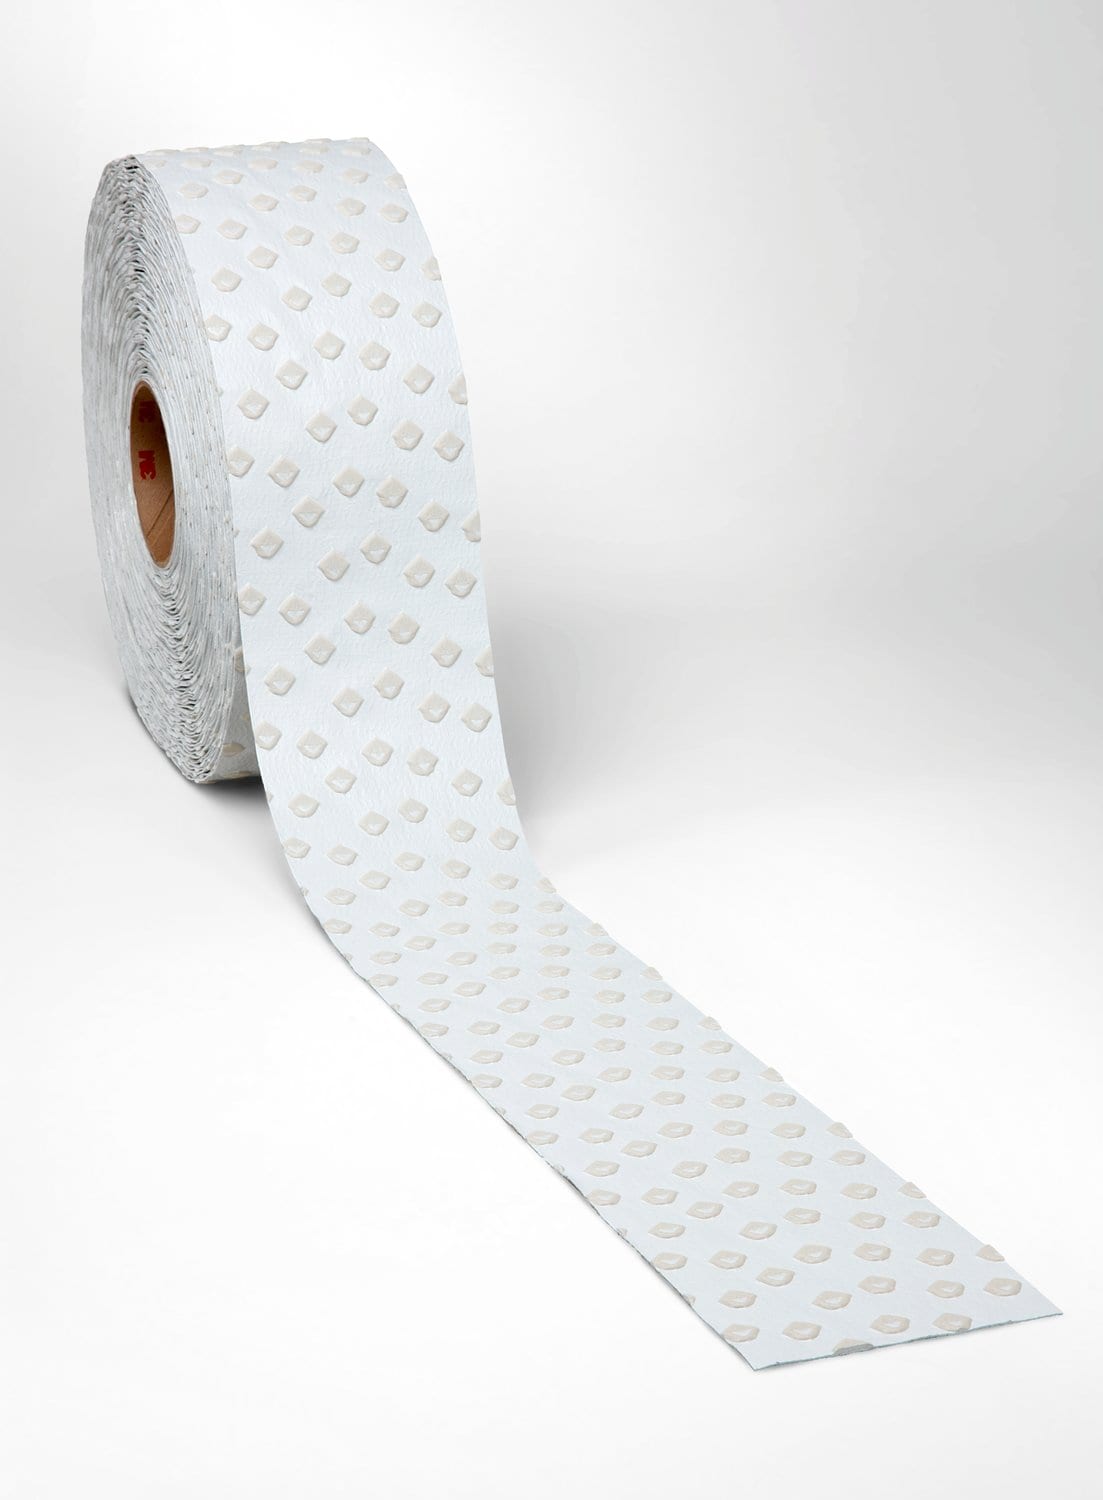 7010344039 - 3M Stamark Removable Pavement Marking Tape A710, White, IL only, 4 in
x 120 yd